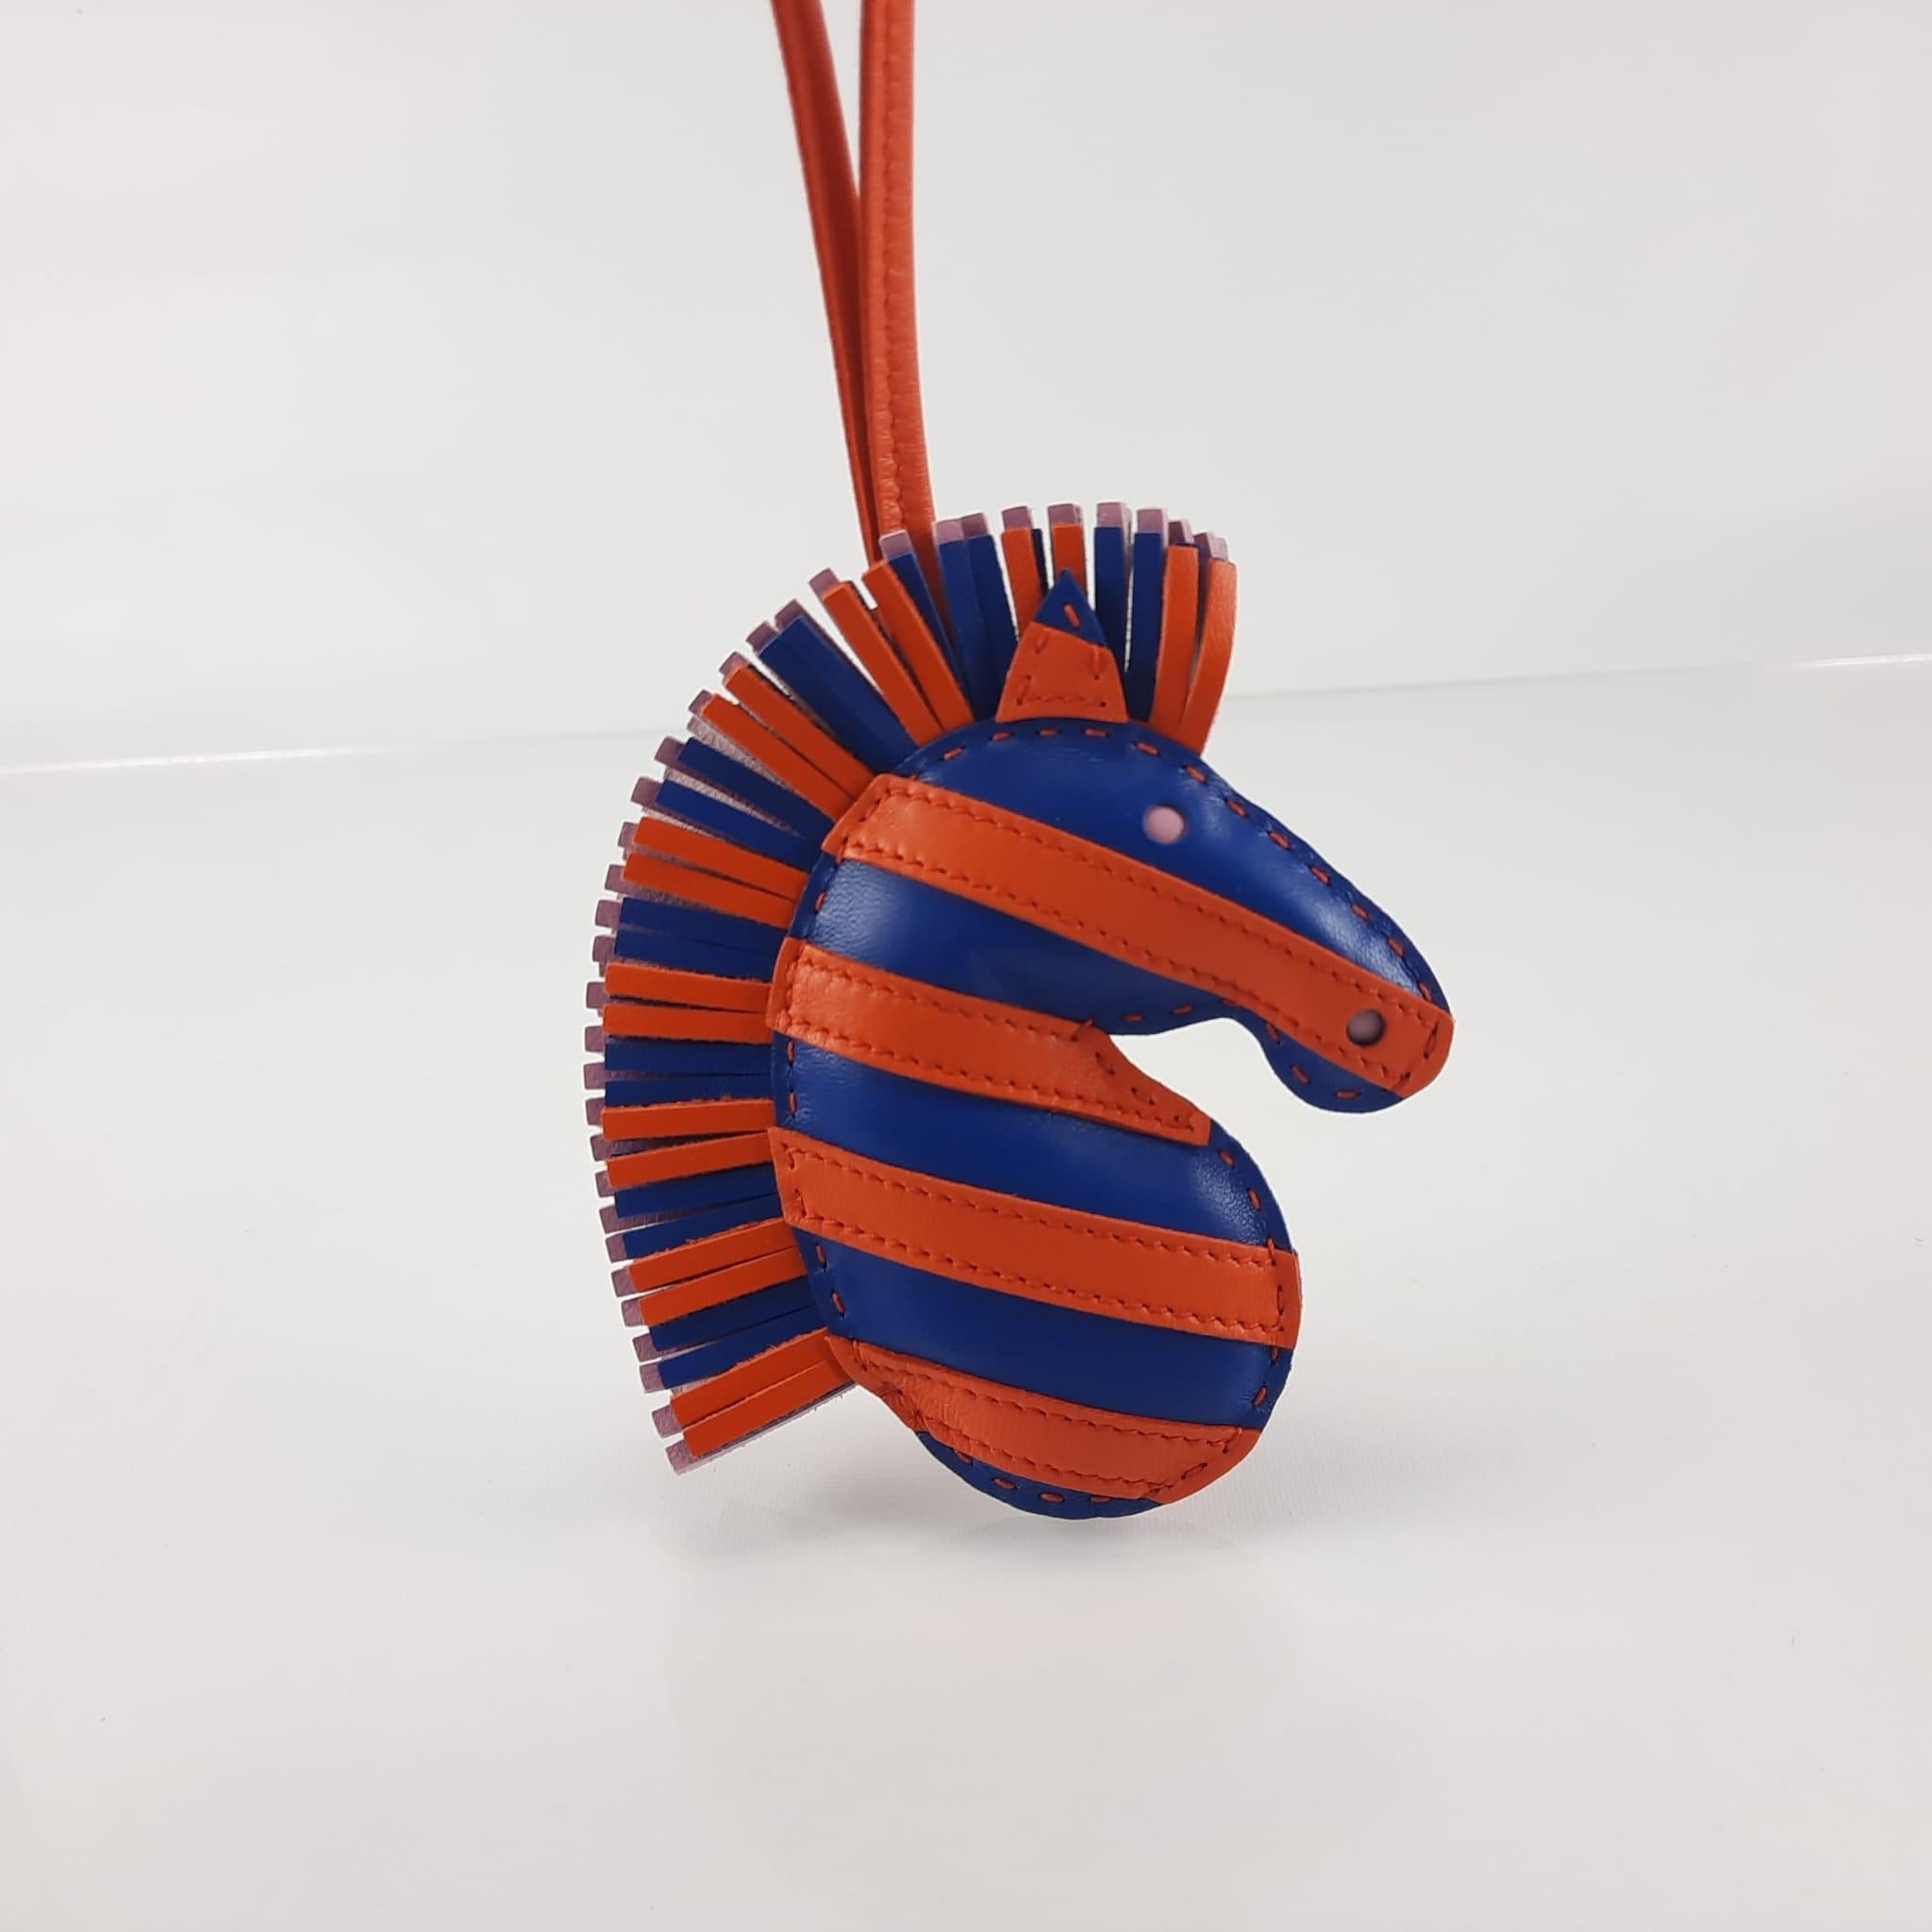 Zebra charm in Milo lambskin
With its colorful mane and jungle spirit, this zebra brings a whimsical touch to our bags
Made in France
Dimensions: L 10.5 x H 10.3 cm